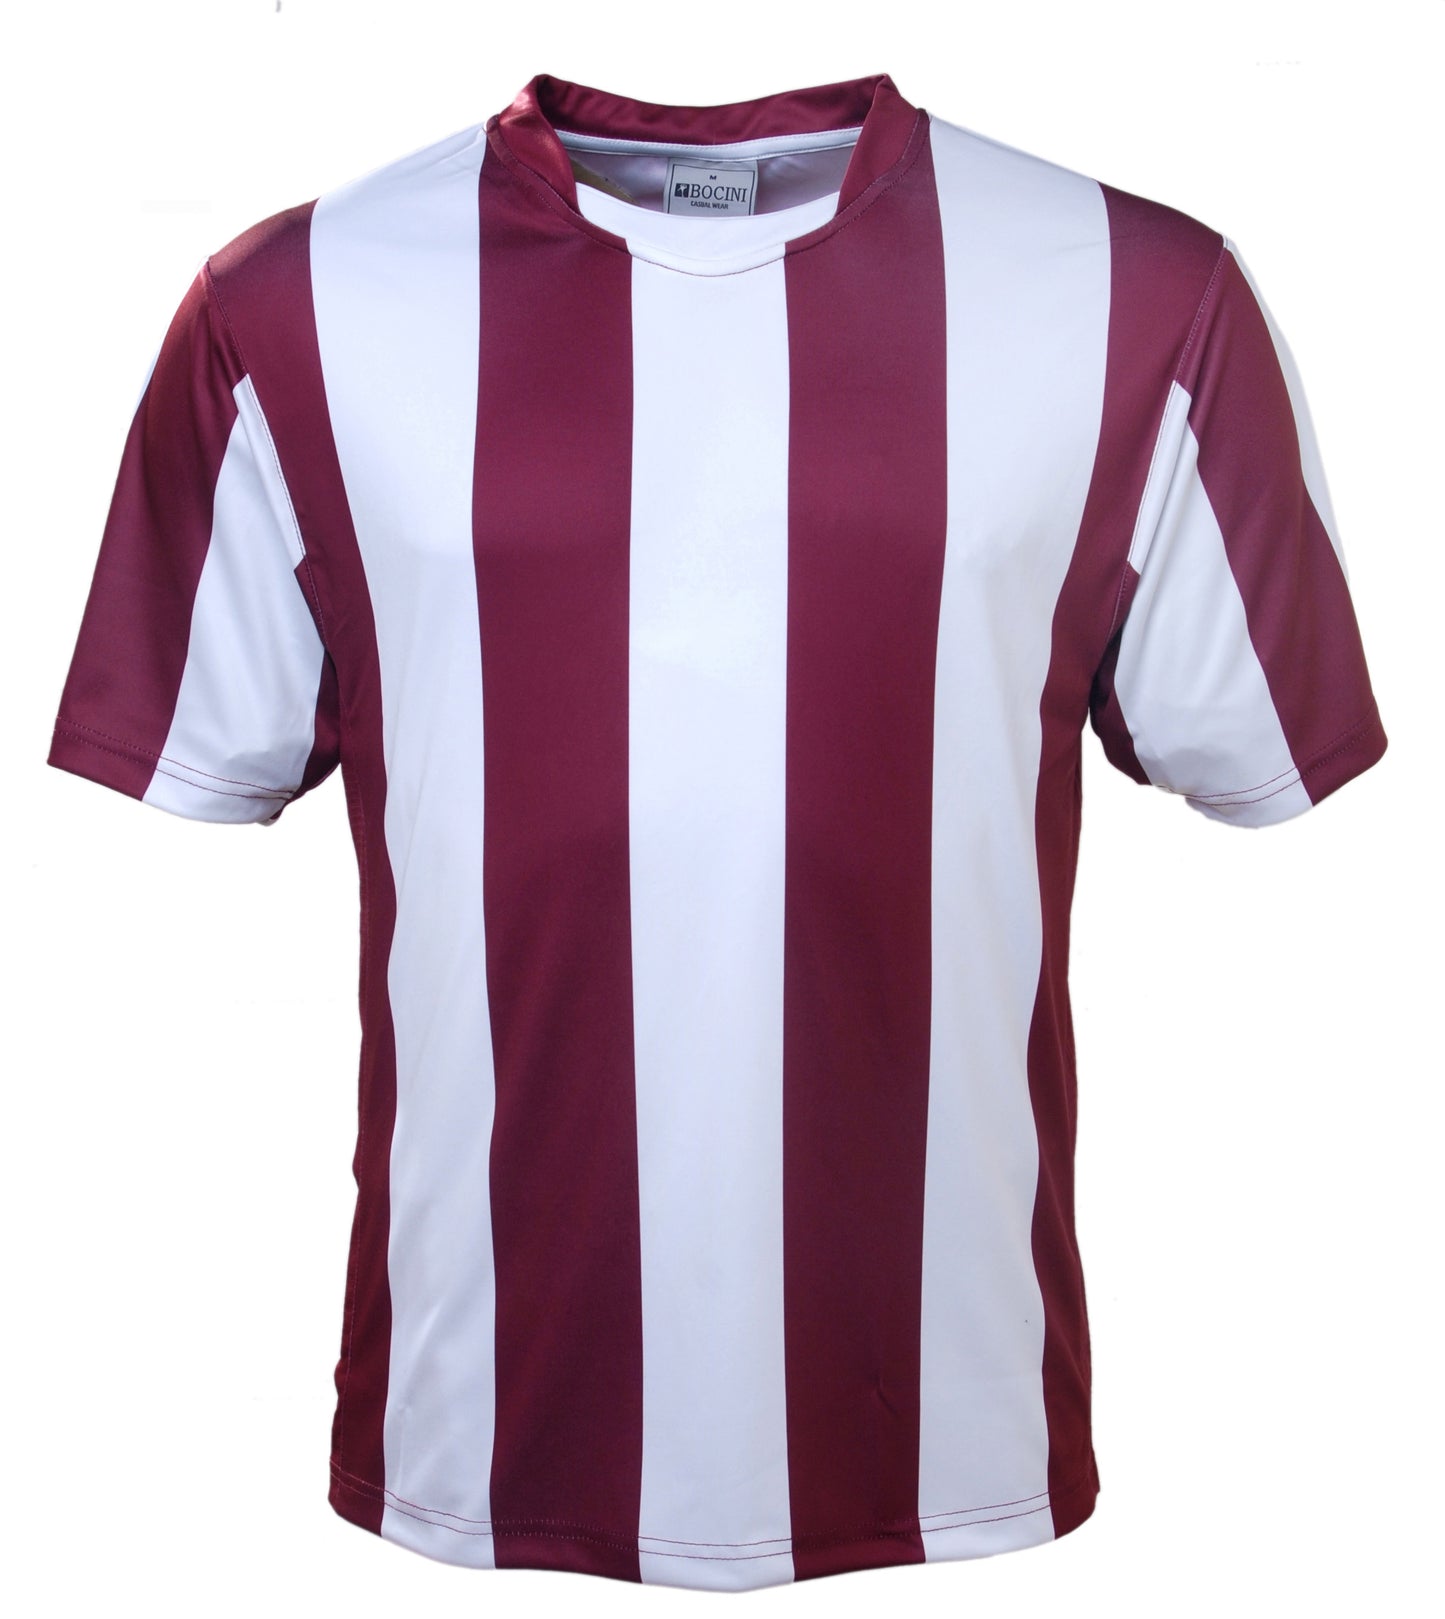 Bocini-Unisex Adults Sublimated Striped Football Jersey-CT1102